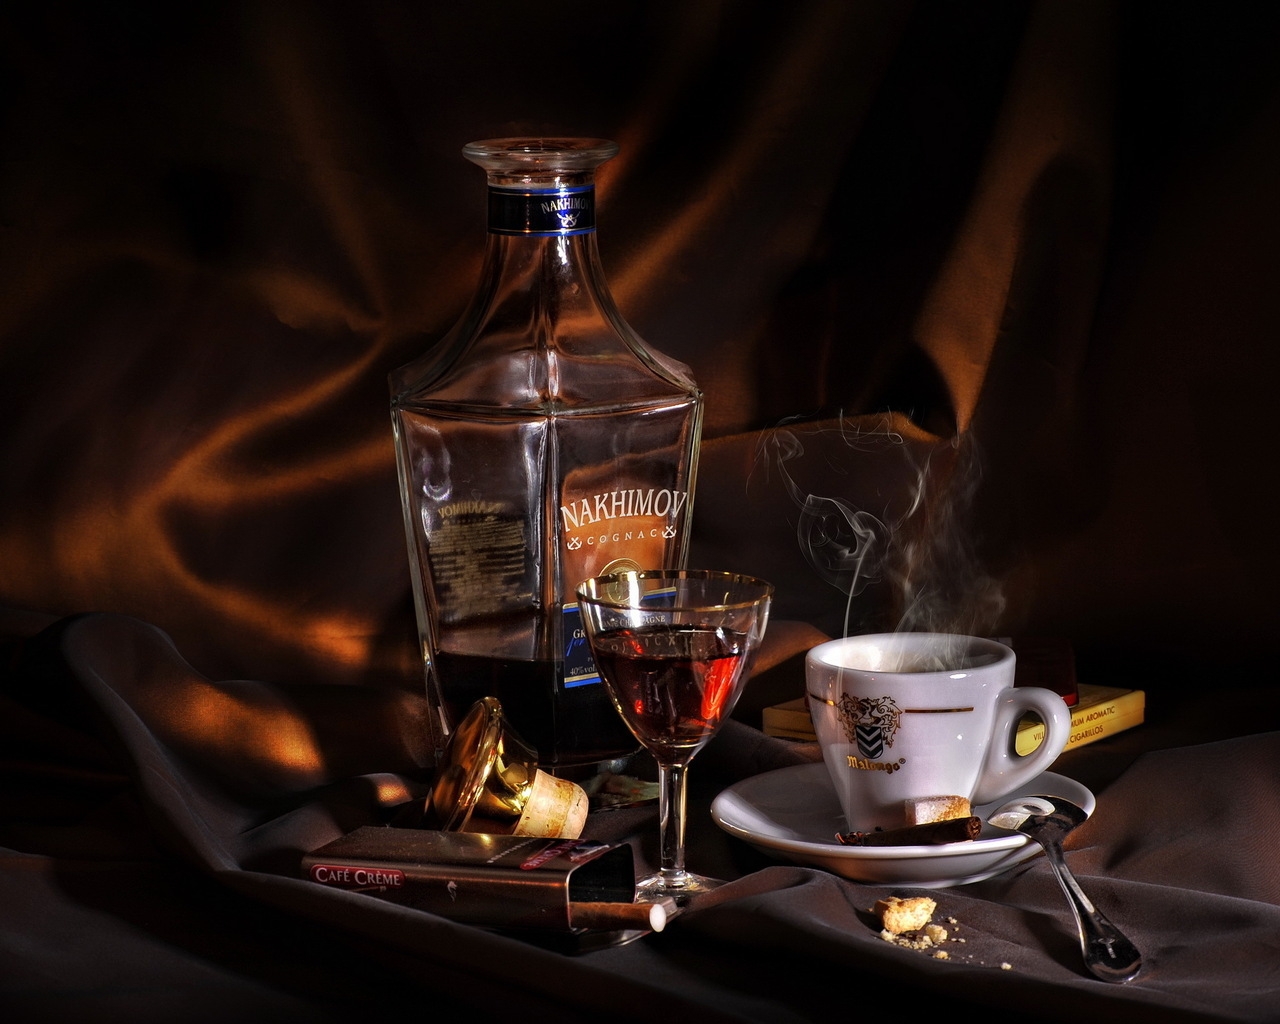 Cognac and Coffe for 1280 x 1024 resolution